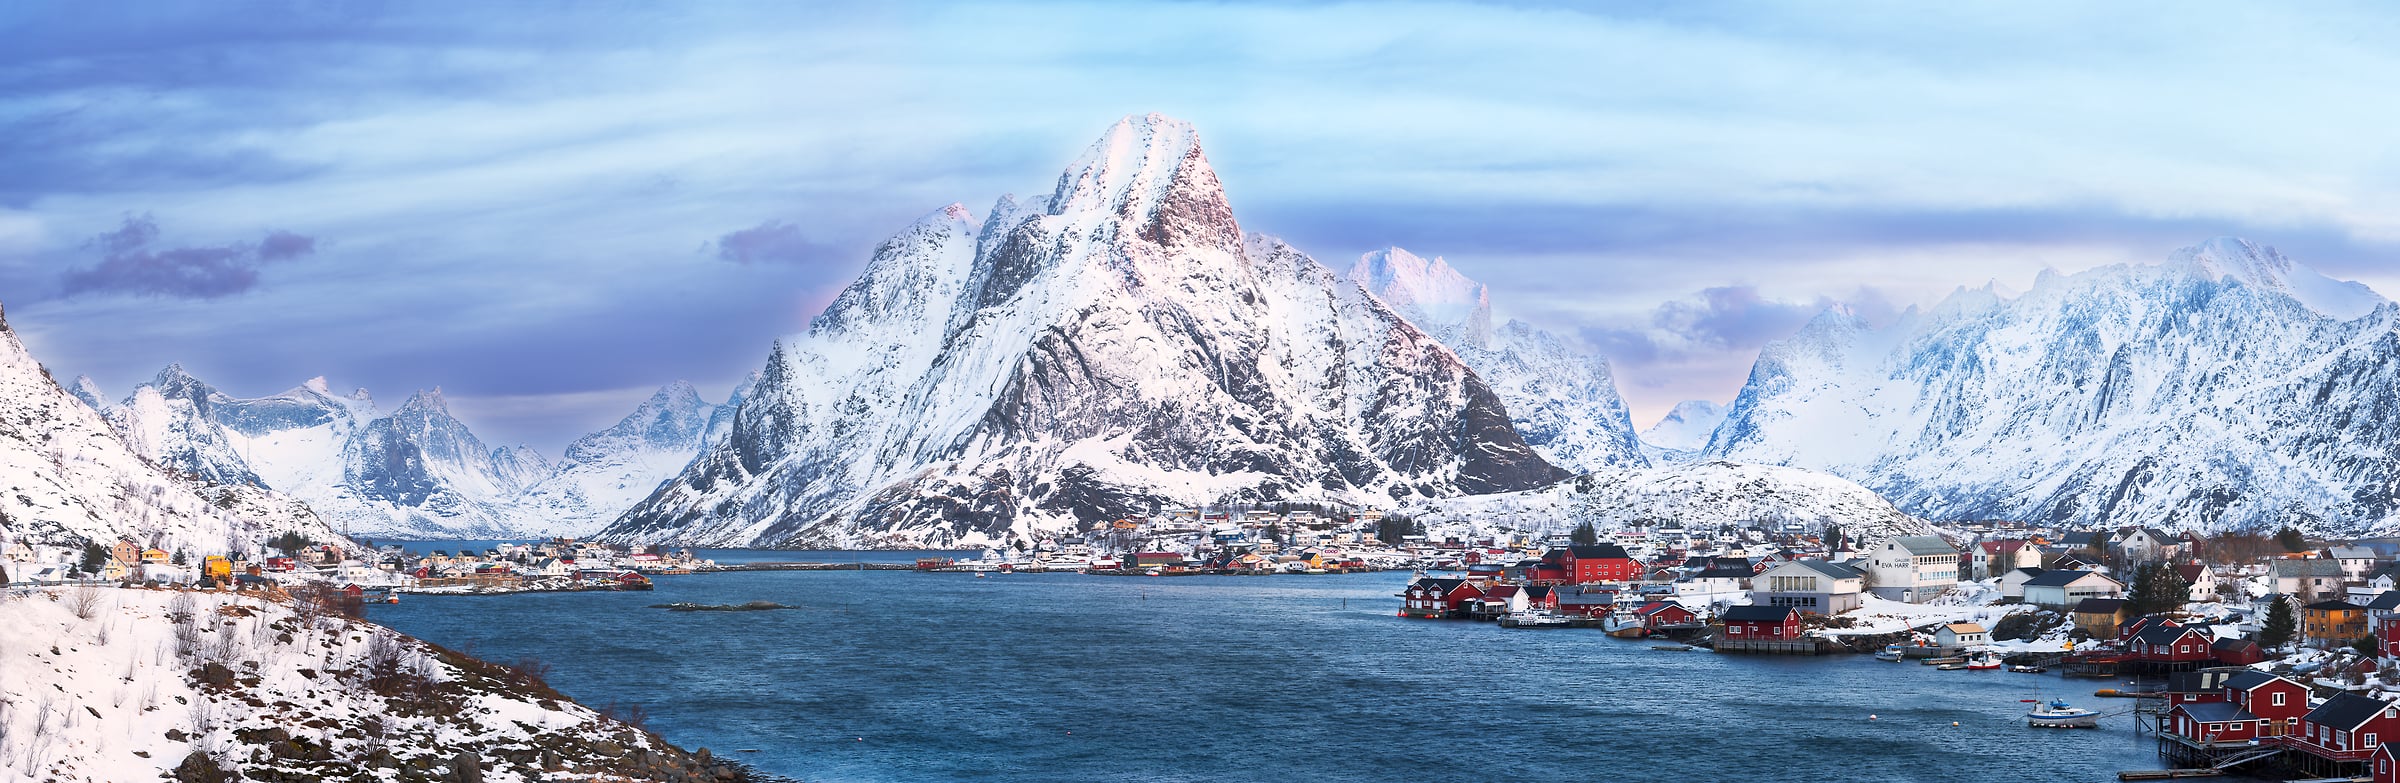 1,000 megapixels! A very high definition, large-format VAST photo print of a mountain landscape with a town and the ocean; landscape photograph created by Ennio Pozzetti in Reine, Lofoten, Norway.